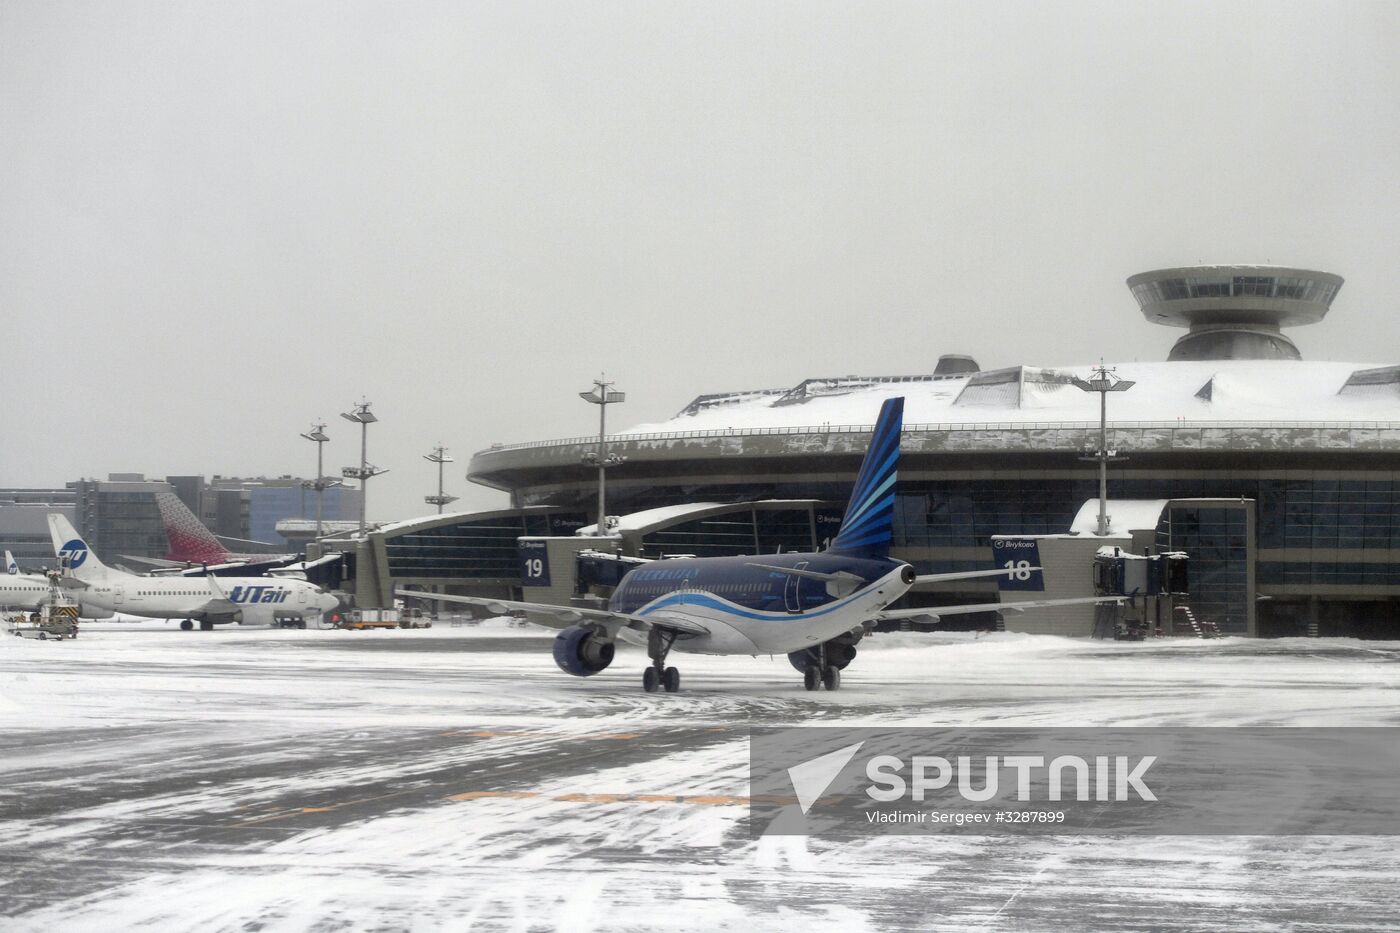 Flight delays in Moscow airports